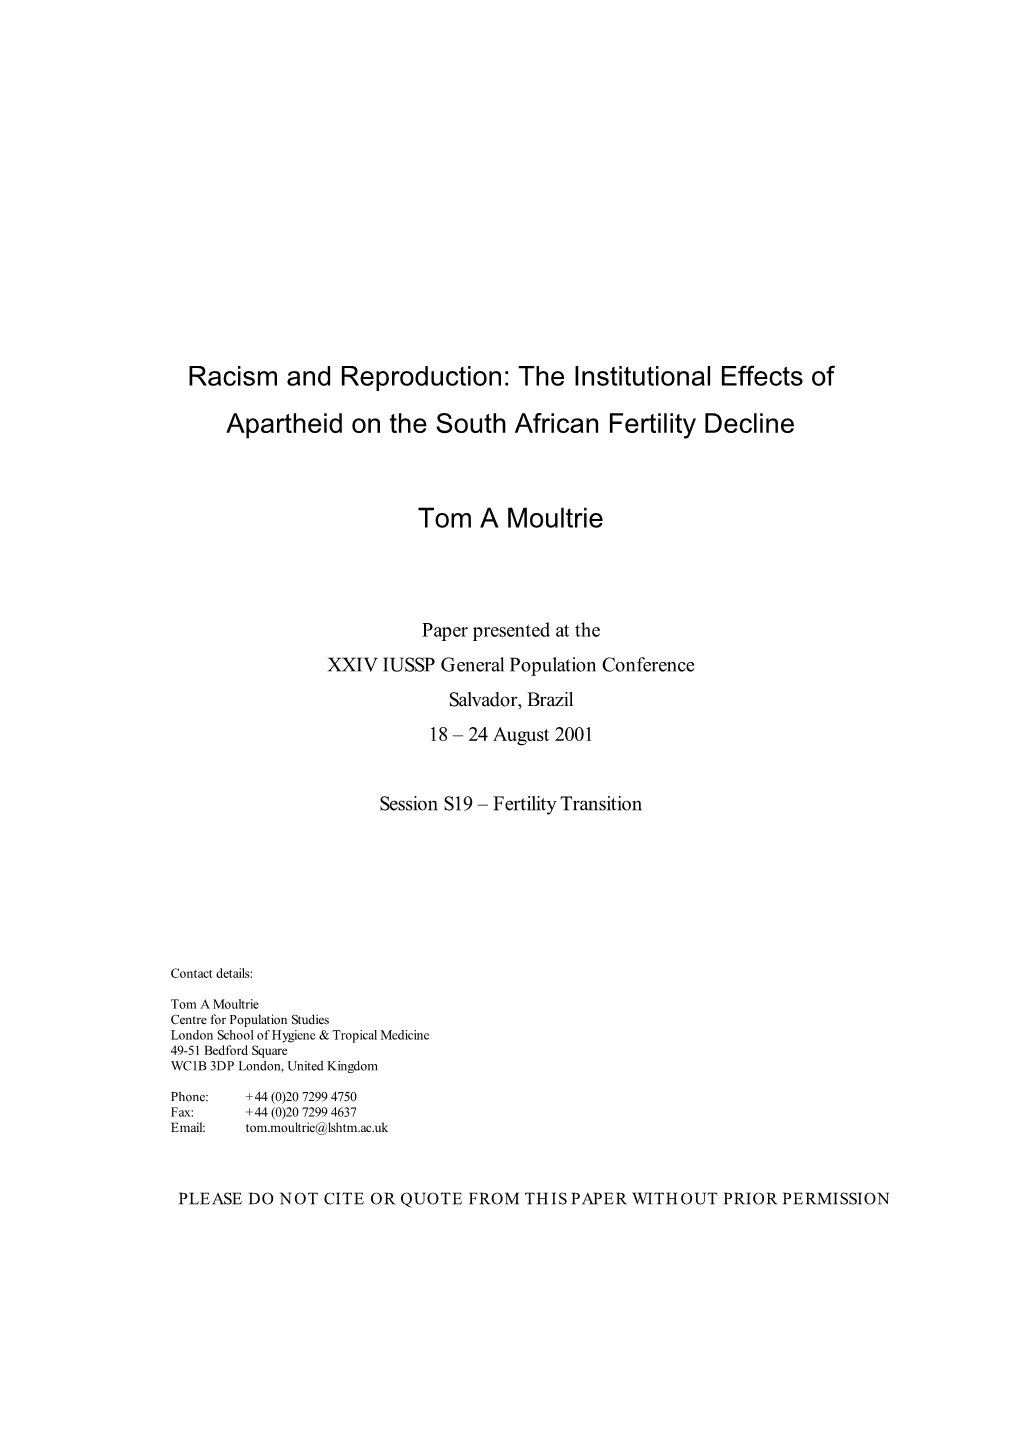 Racism and Reproduction: the Institutional Effects of Apartheid on the South African Fertility Decline